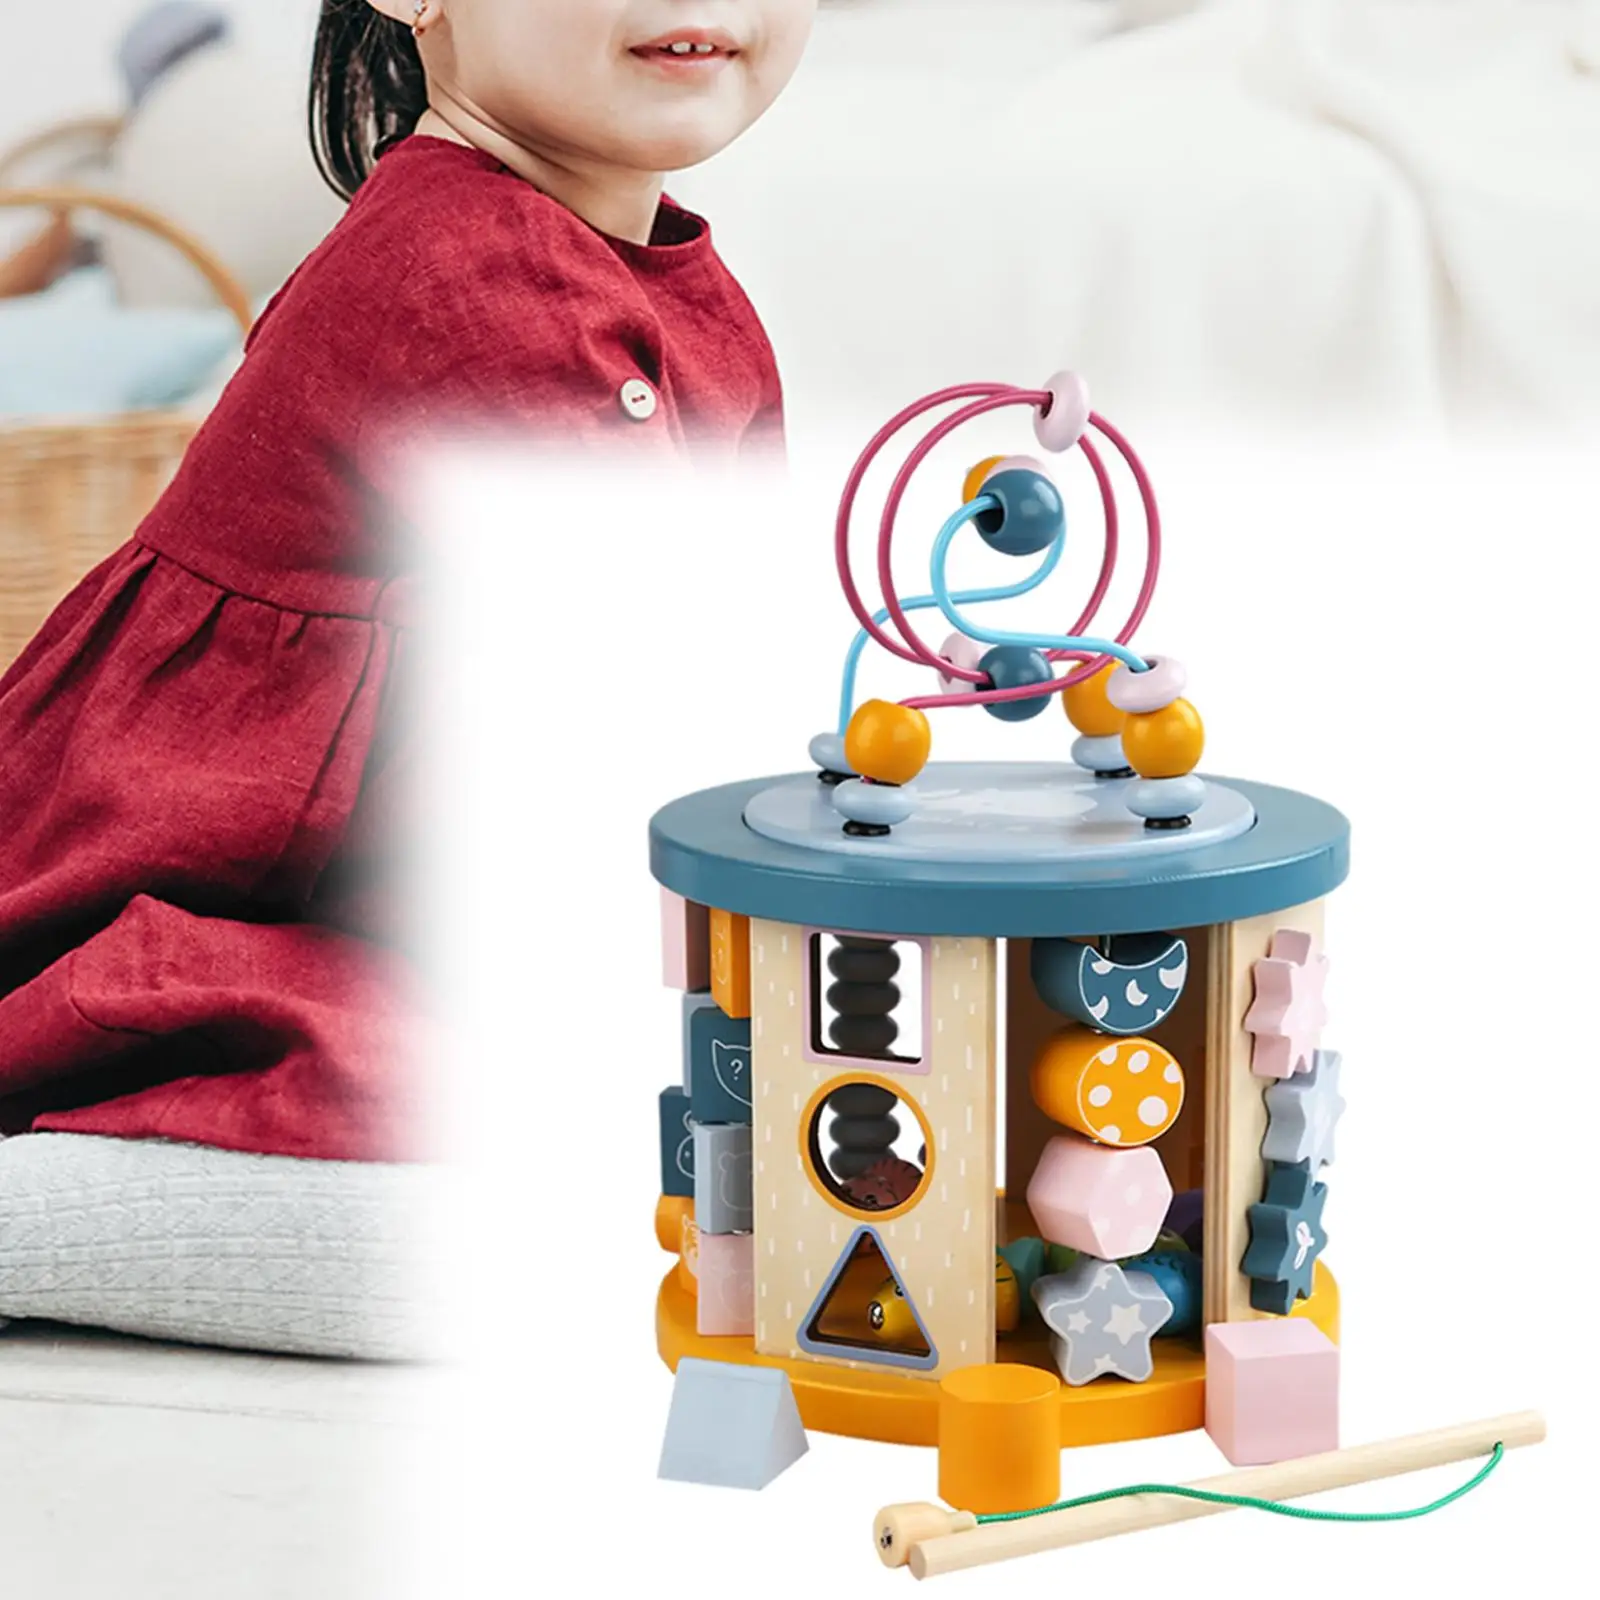 11-in-1 Activity Cubic Learning Toys Babies Wooden Activity Blocks Bead Maze Educational Toy for Kids Boys Girls Gift